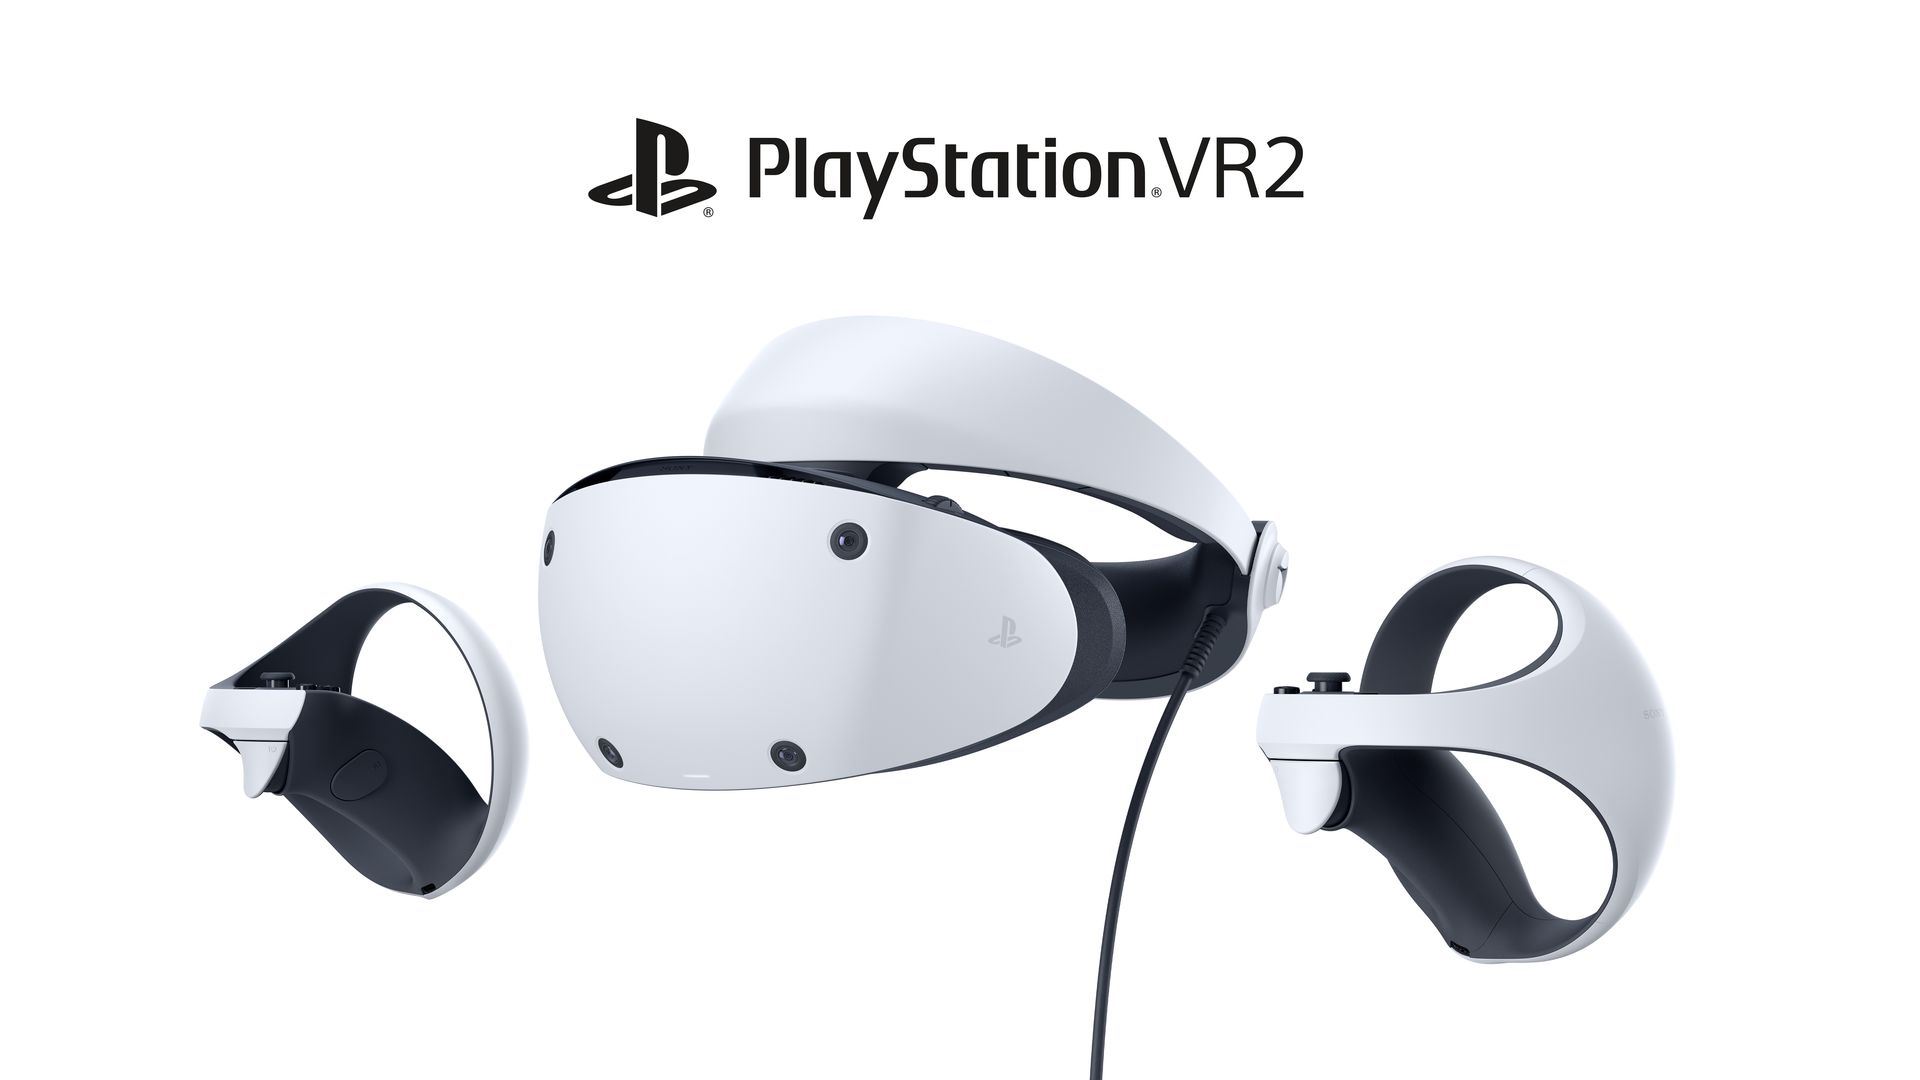 Image of a white PSVR 2 headset and its controllers